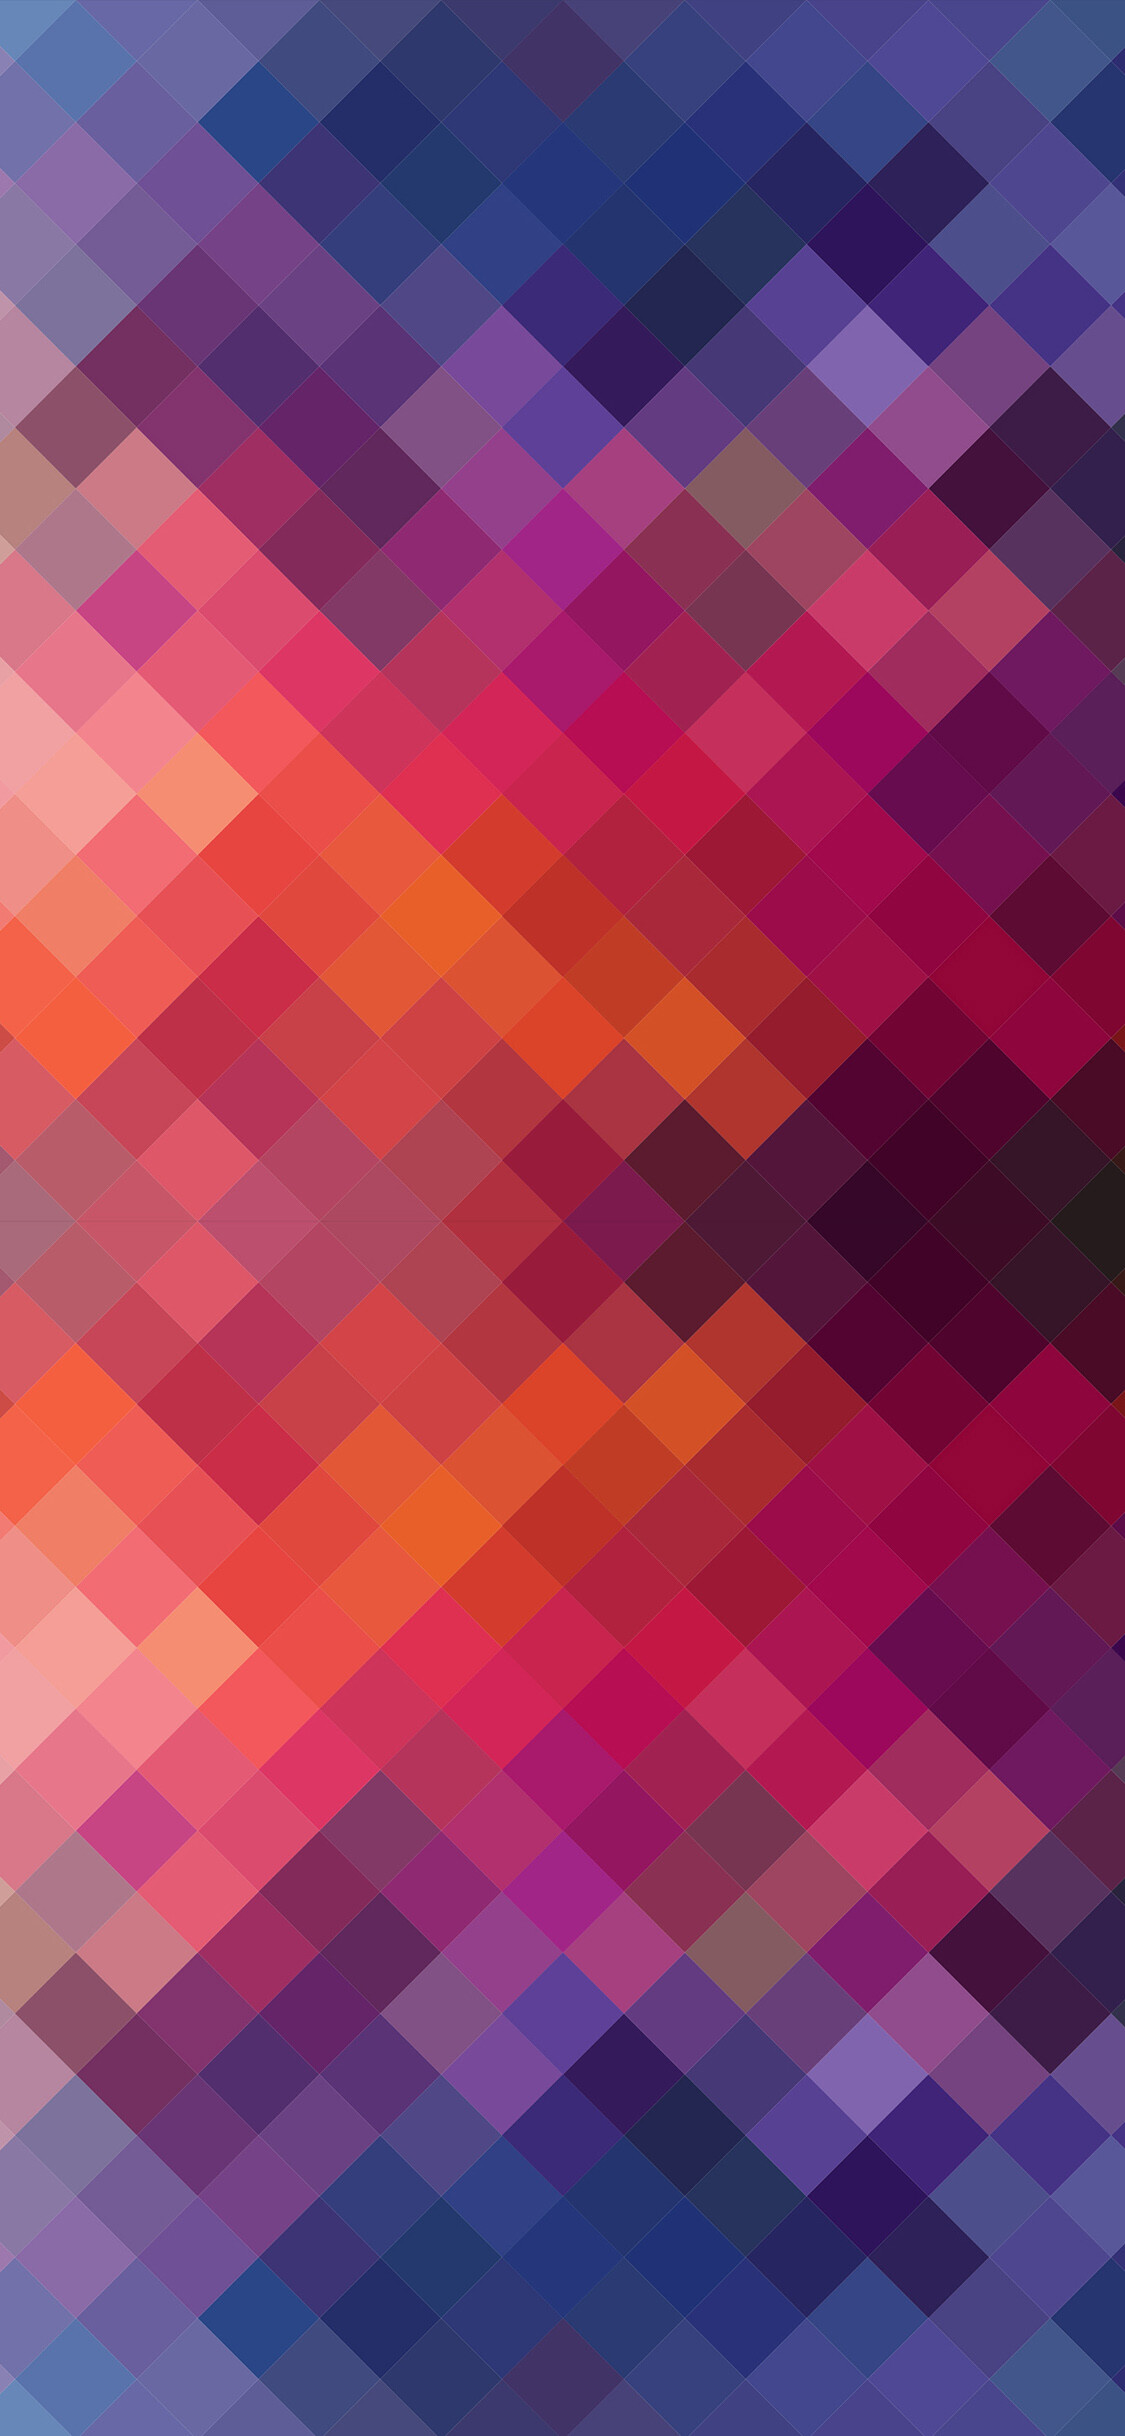 Geometry: Right angles, Squares, Multicolored, Two-dimensional space. 1130x2440 HD Wallpaper.